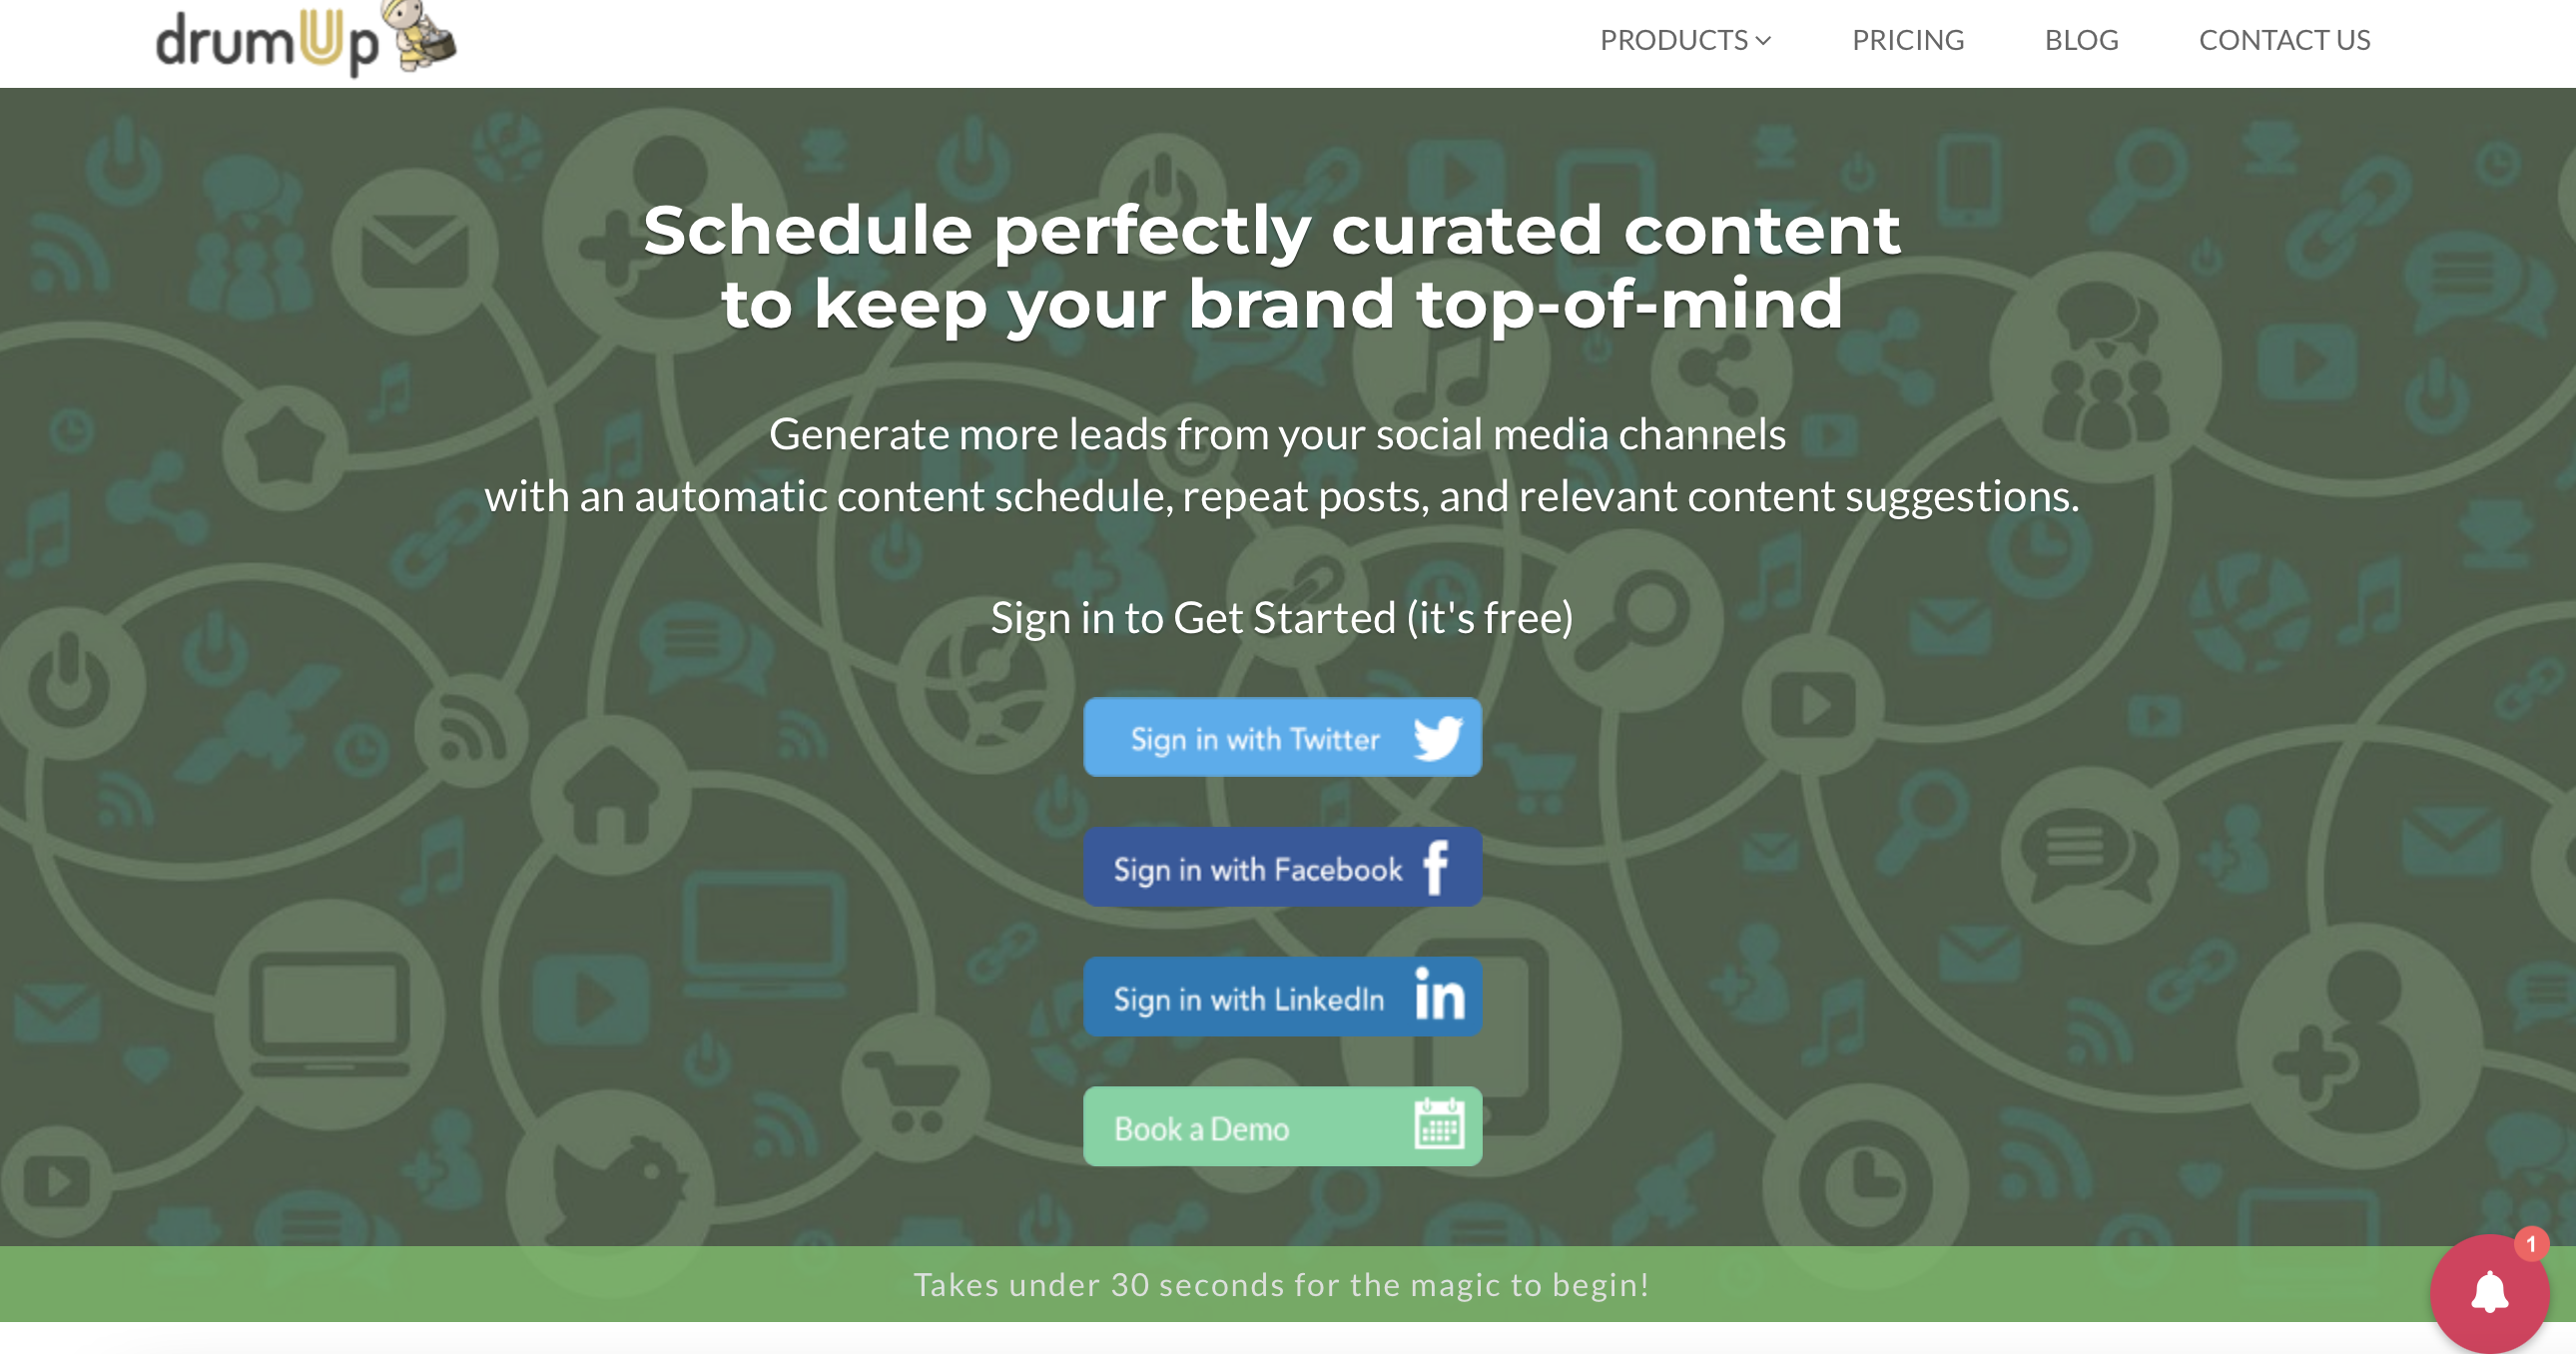 Drum Up homepage showing text that reads "schedule perfectly curated content to keep your brand top-of-mind"